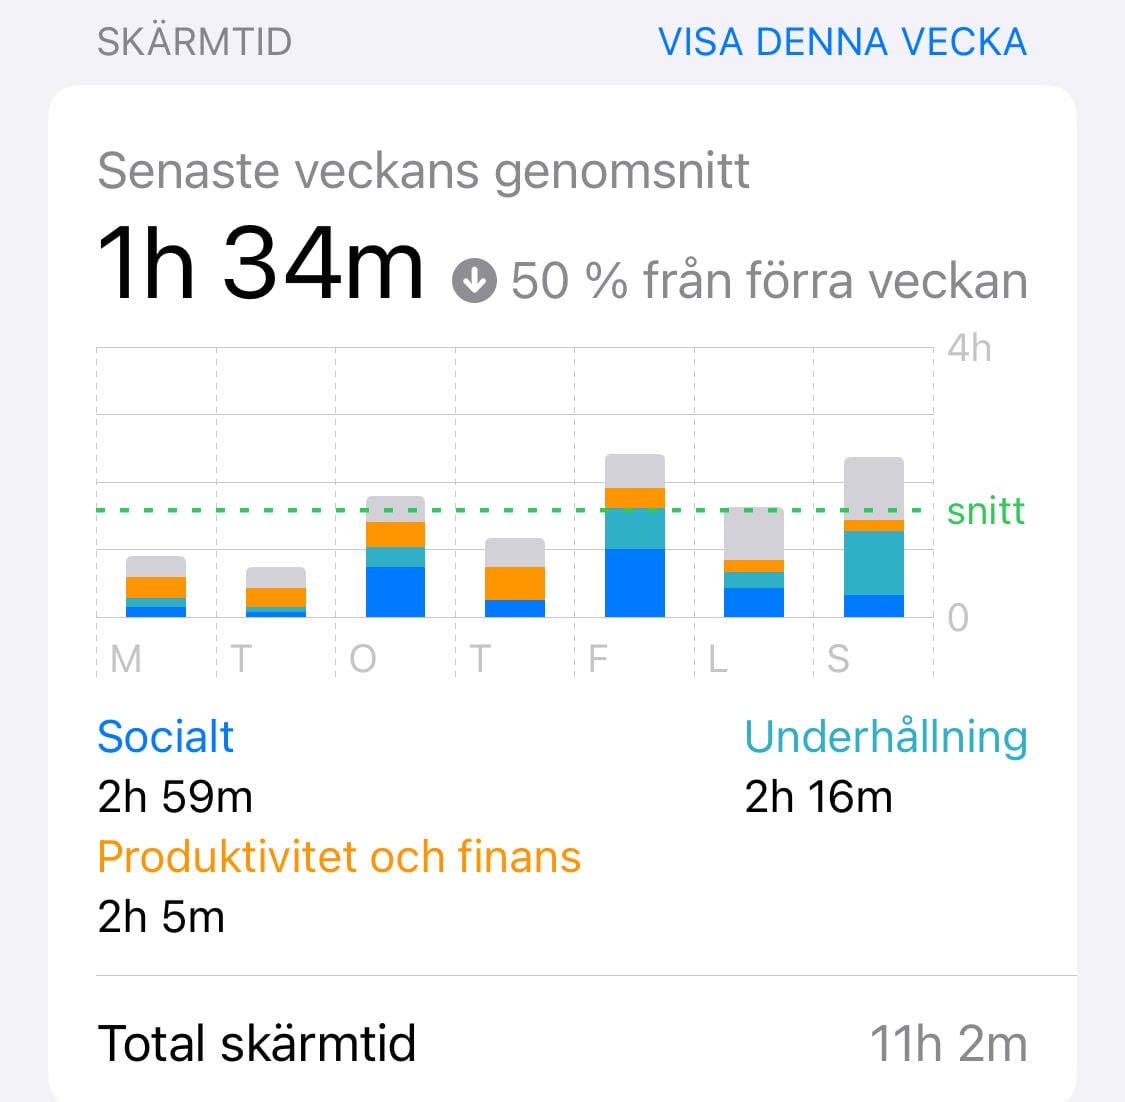 Screenshot of Oskar's Iphone usage from the Iphone settings